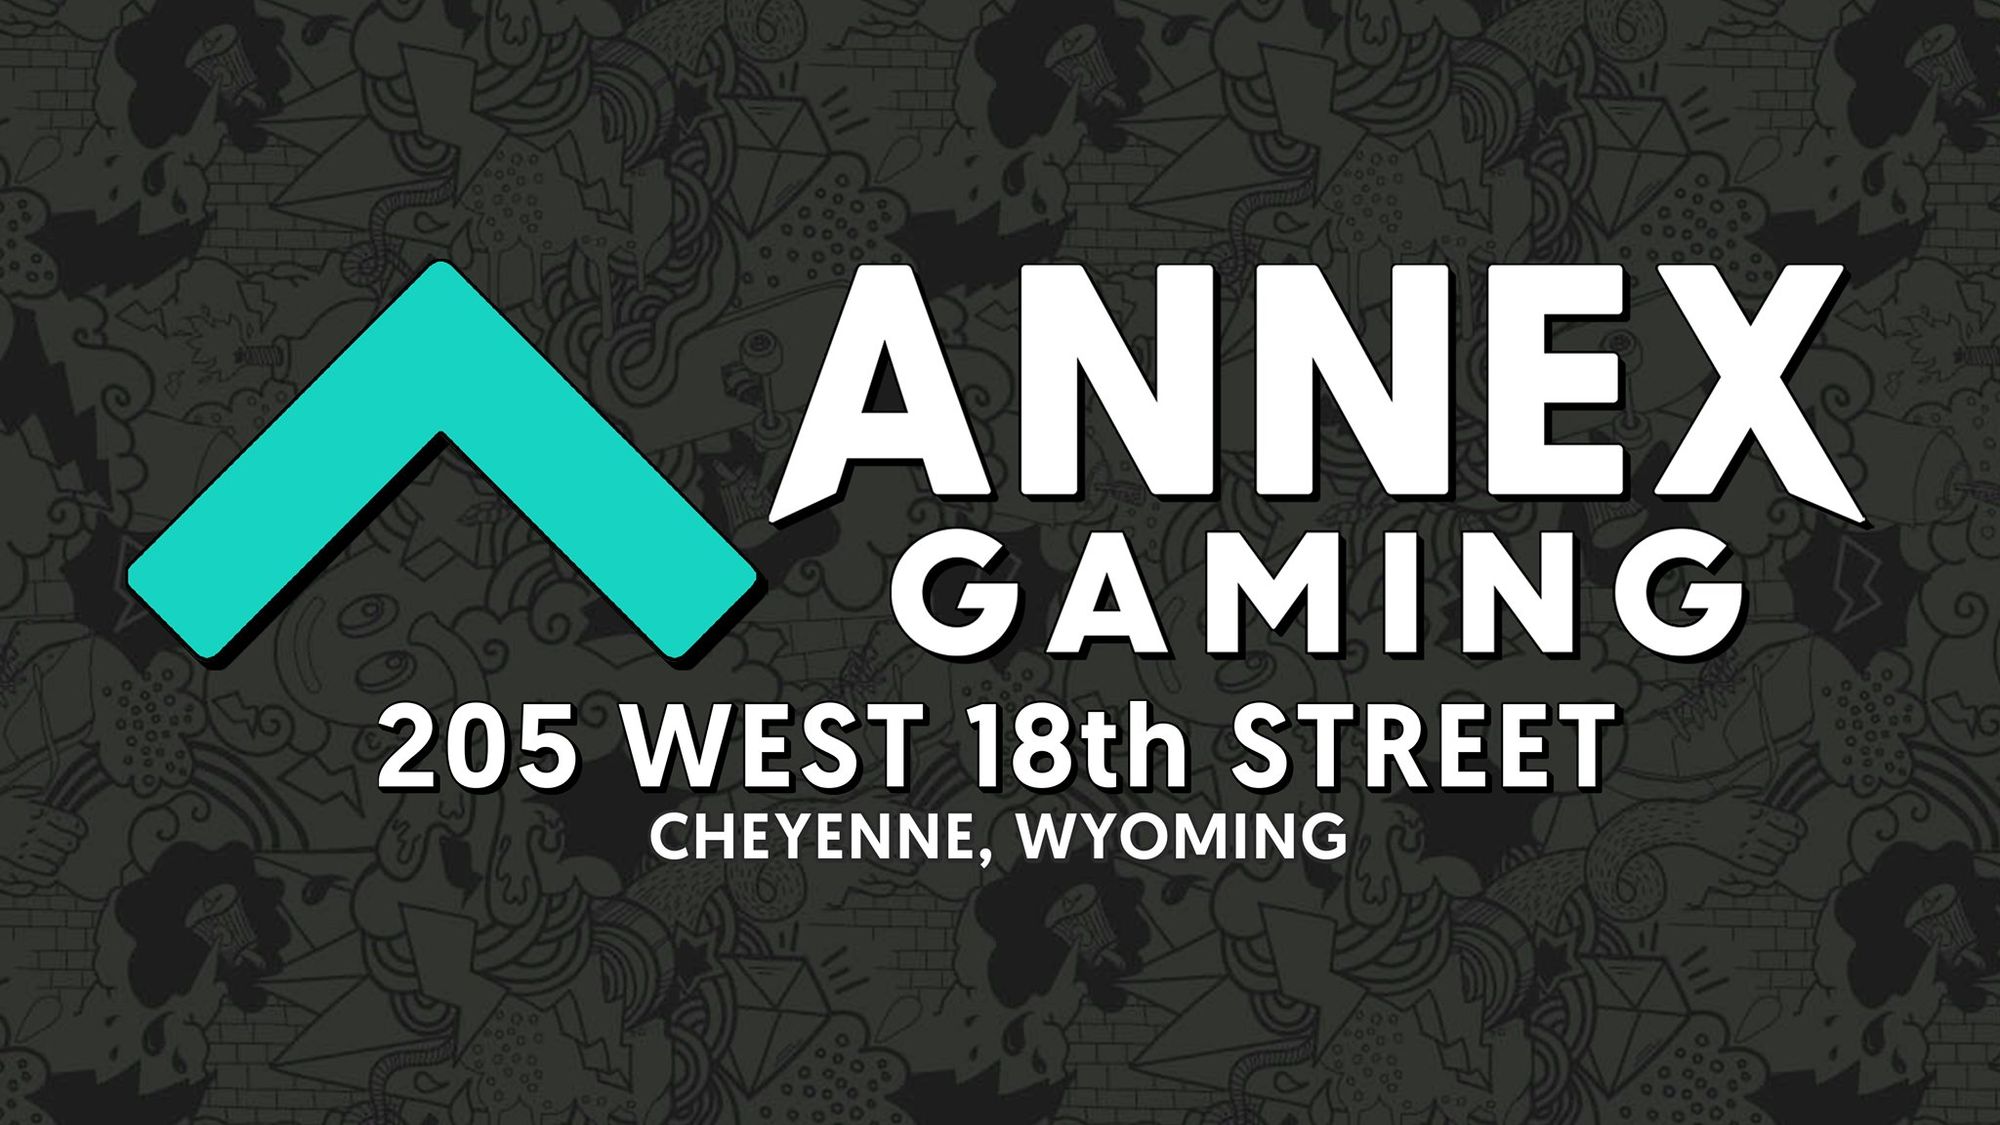 Downtown Cheyenne Now Has A PC Gaming Café